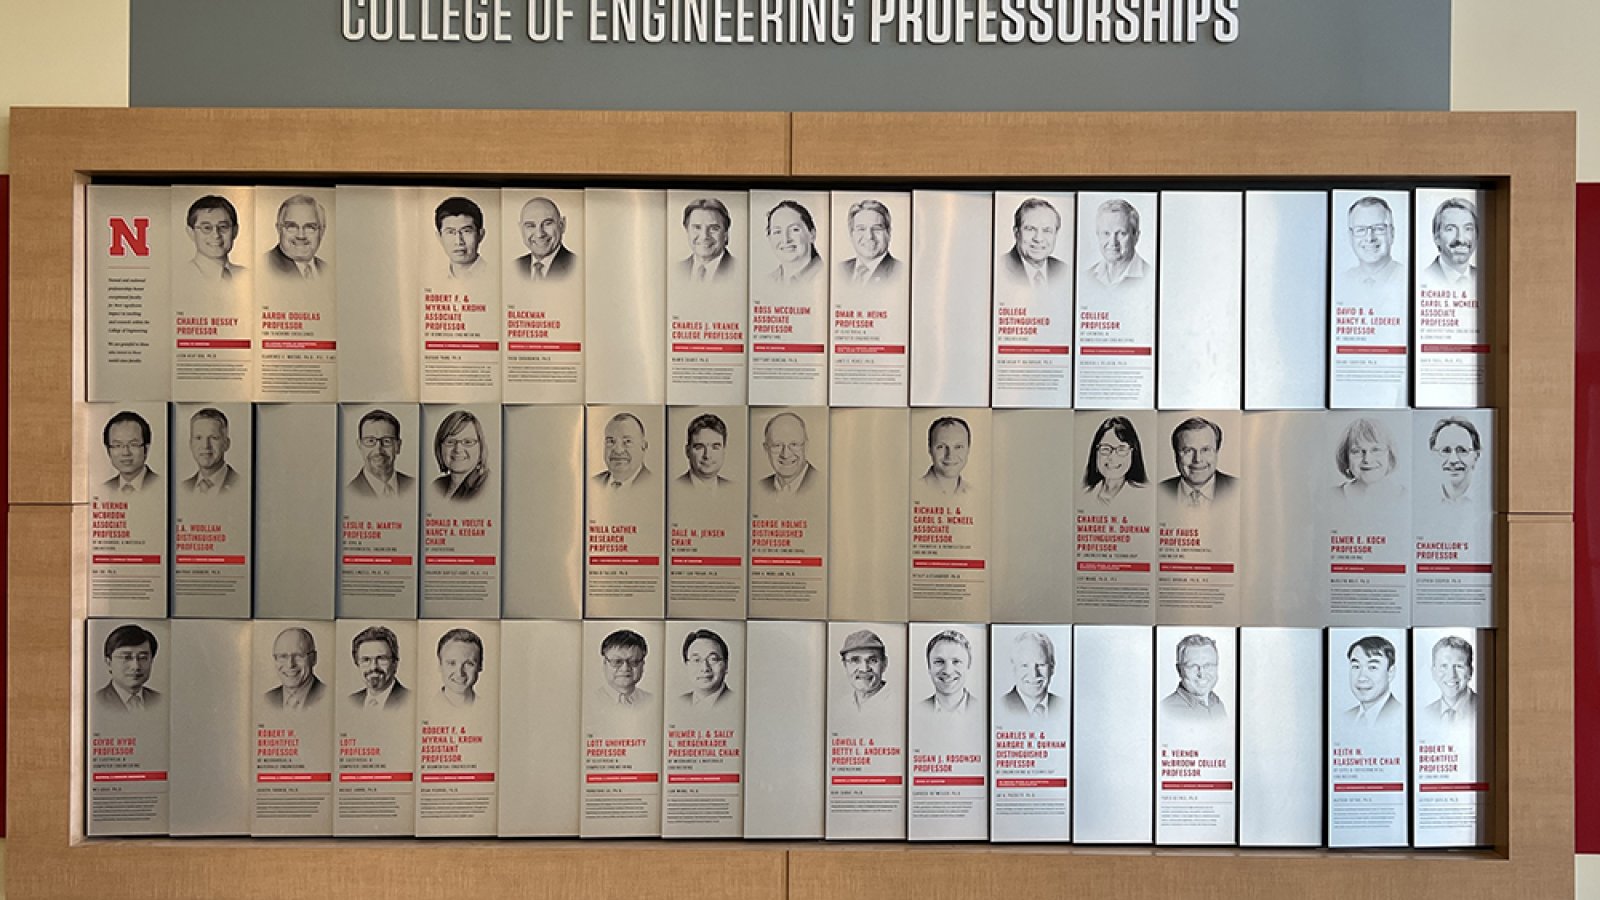 Ten faculty from the College of Engineering have been honored with new named professorships, bringing to 27 the total of named professorships in the college.